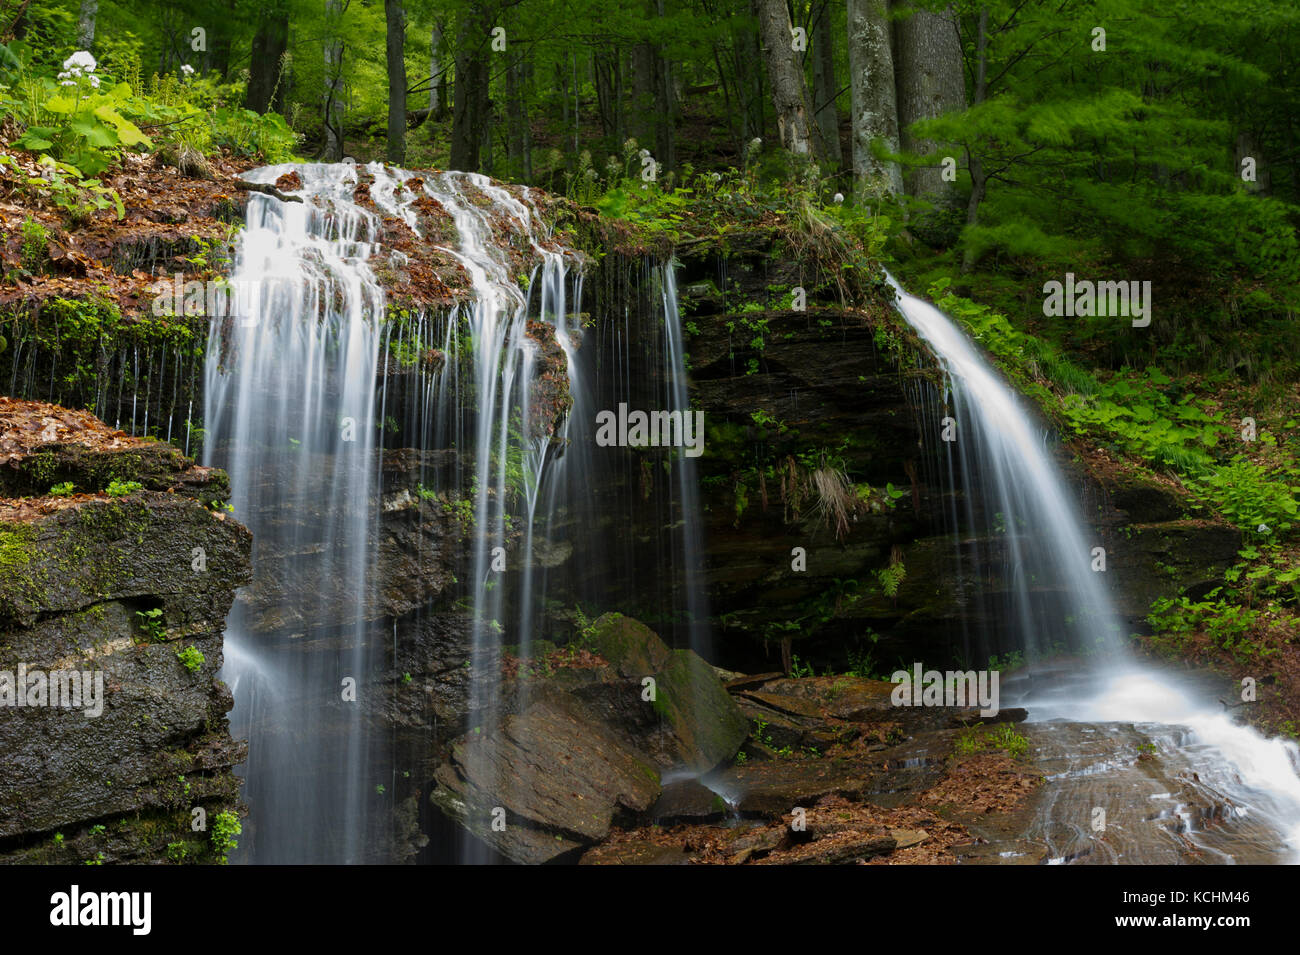 Domogled National Park / Romania - Waterfall in the primary beech forest in Iauna Craiove UNESCO World Nature Heritage component part. Stock Photo